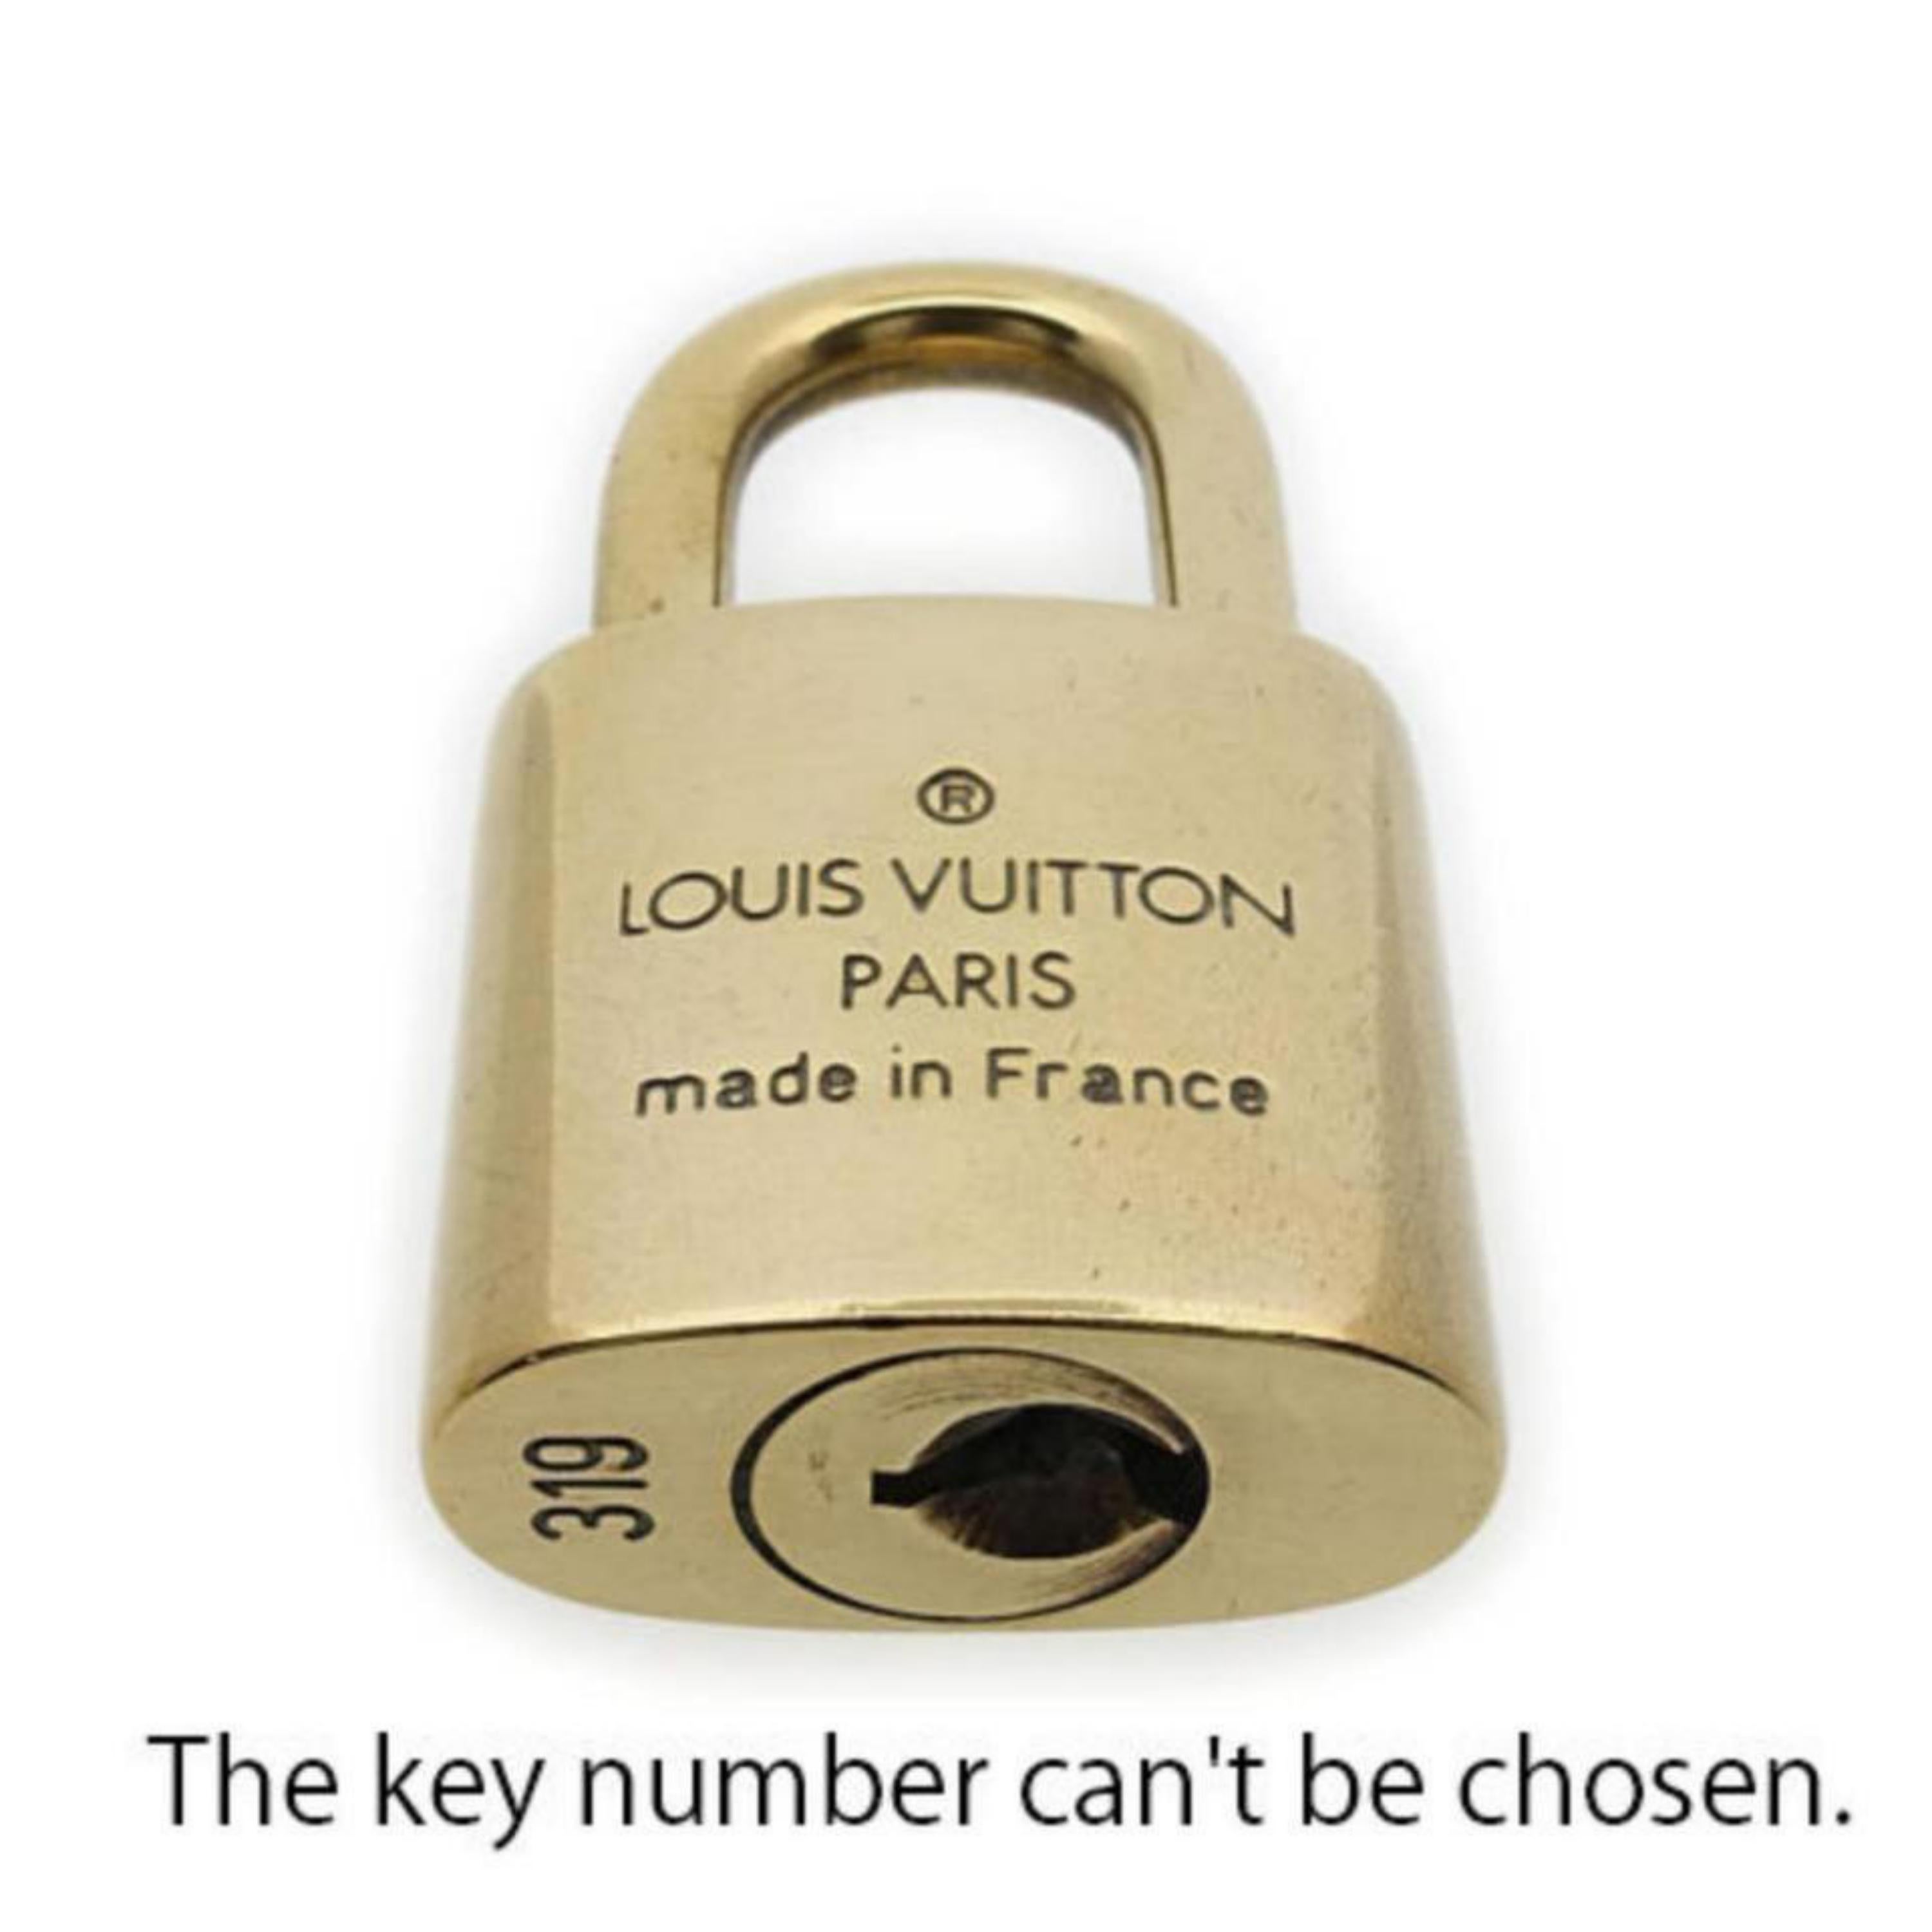 Lock Number may vary from photo 
2.1x3.8cm
Includes Lock and 1 Key
Some scratches, wear and tarnish.
Reminder you not choose the number.
ONLY ONE KEY IS INCLUDED.
Please review photos for more details. 
Color appearance may vary depending on your